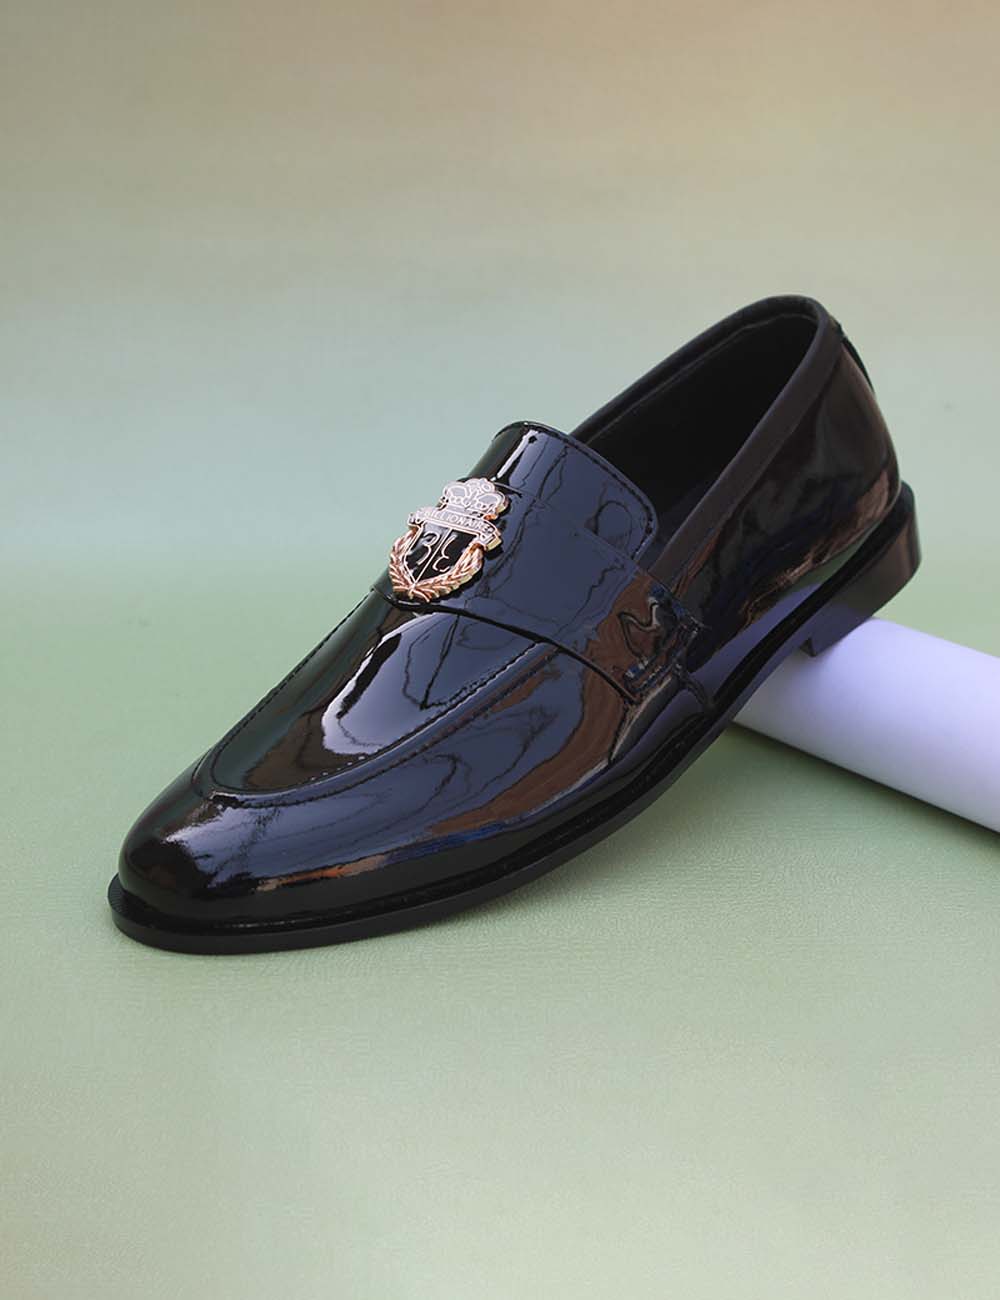 Men's Shoes With Black Shiny Leather